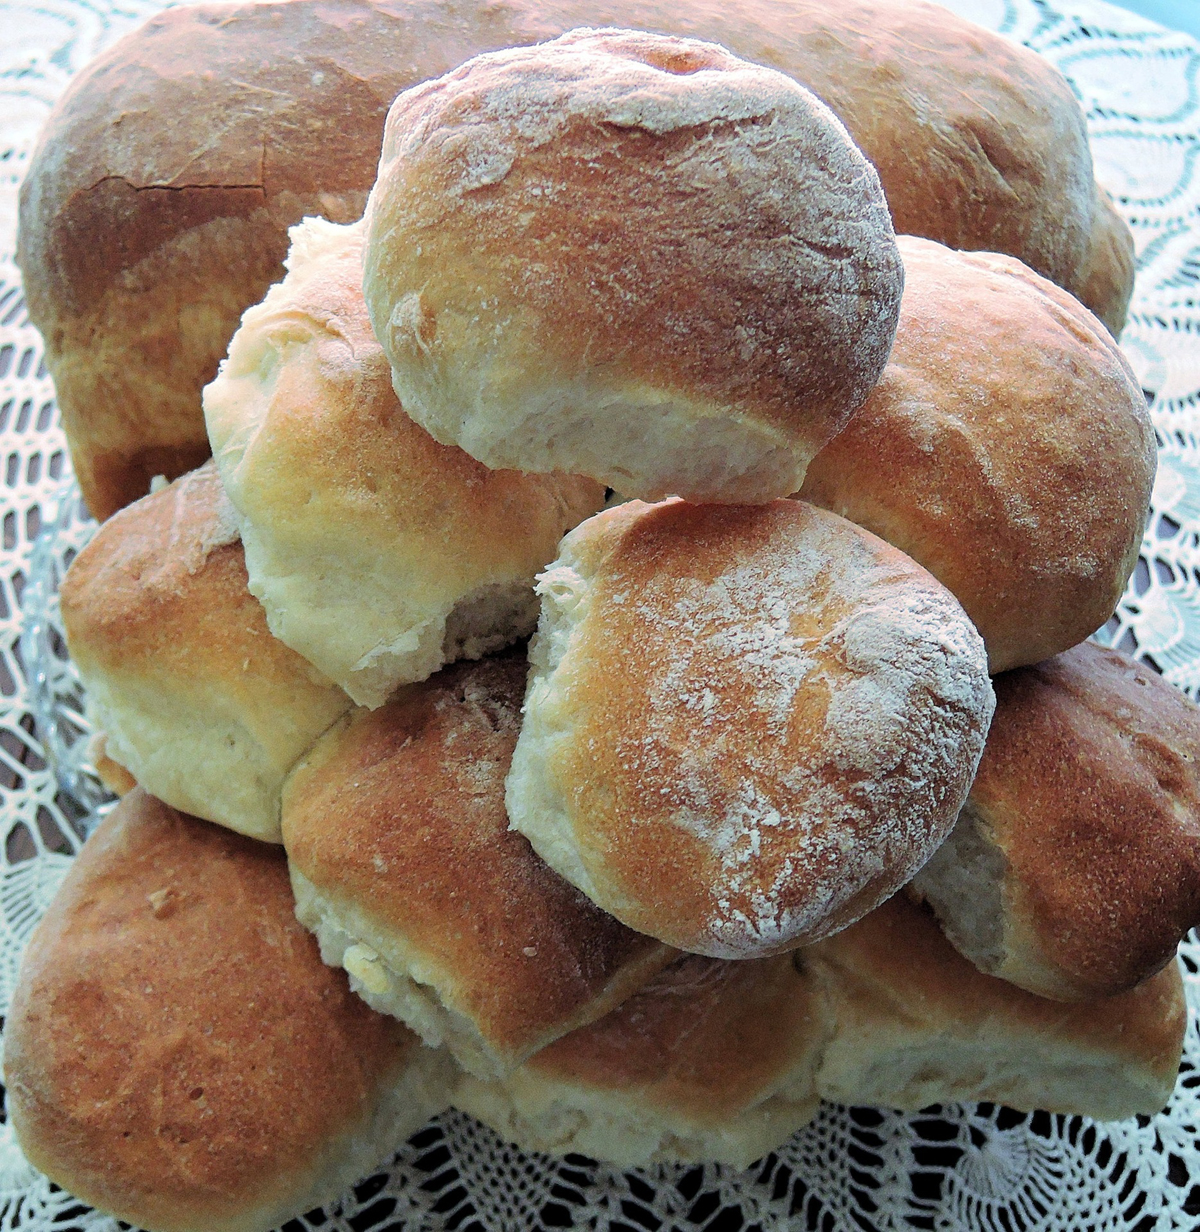 Home Baked Bread & Rolls – Made Simple!